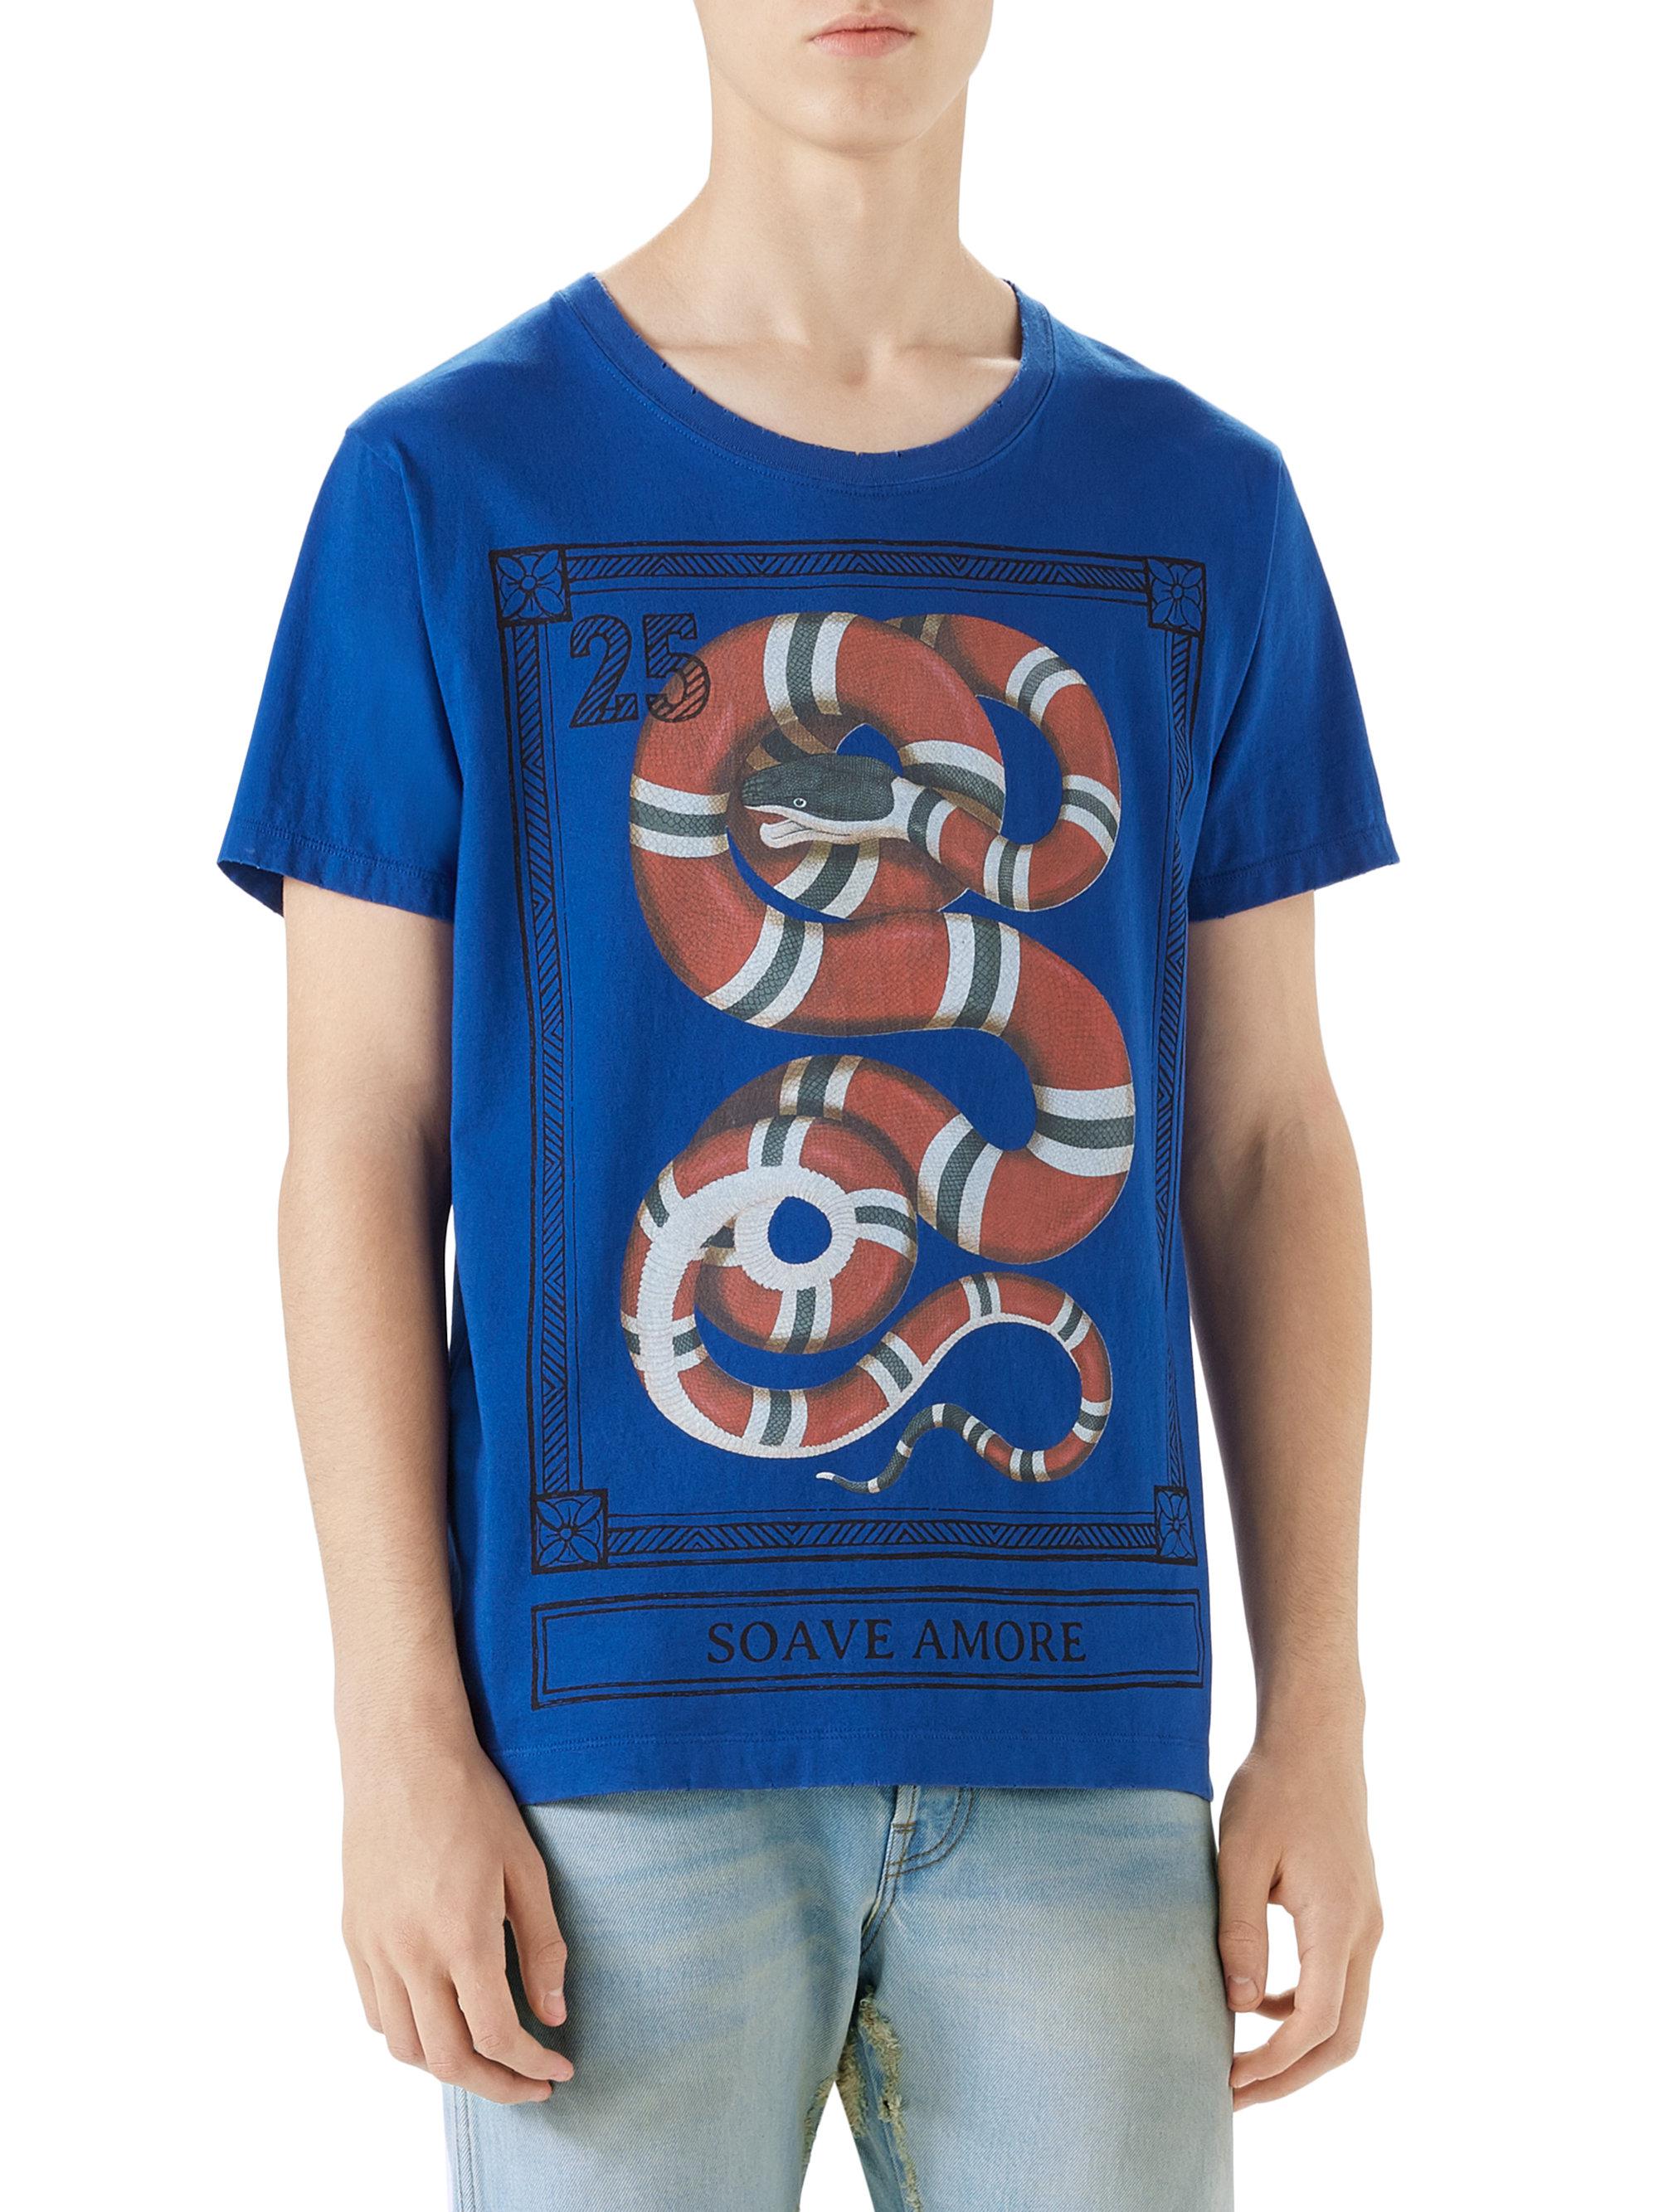 Gucci Cotton Snake Stamp Graphic T-shirt in Blue for Men - Lyst